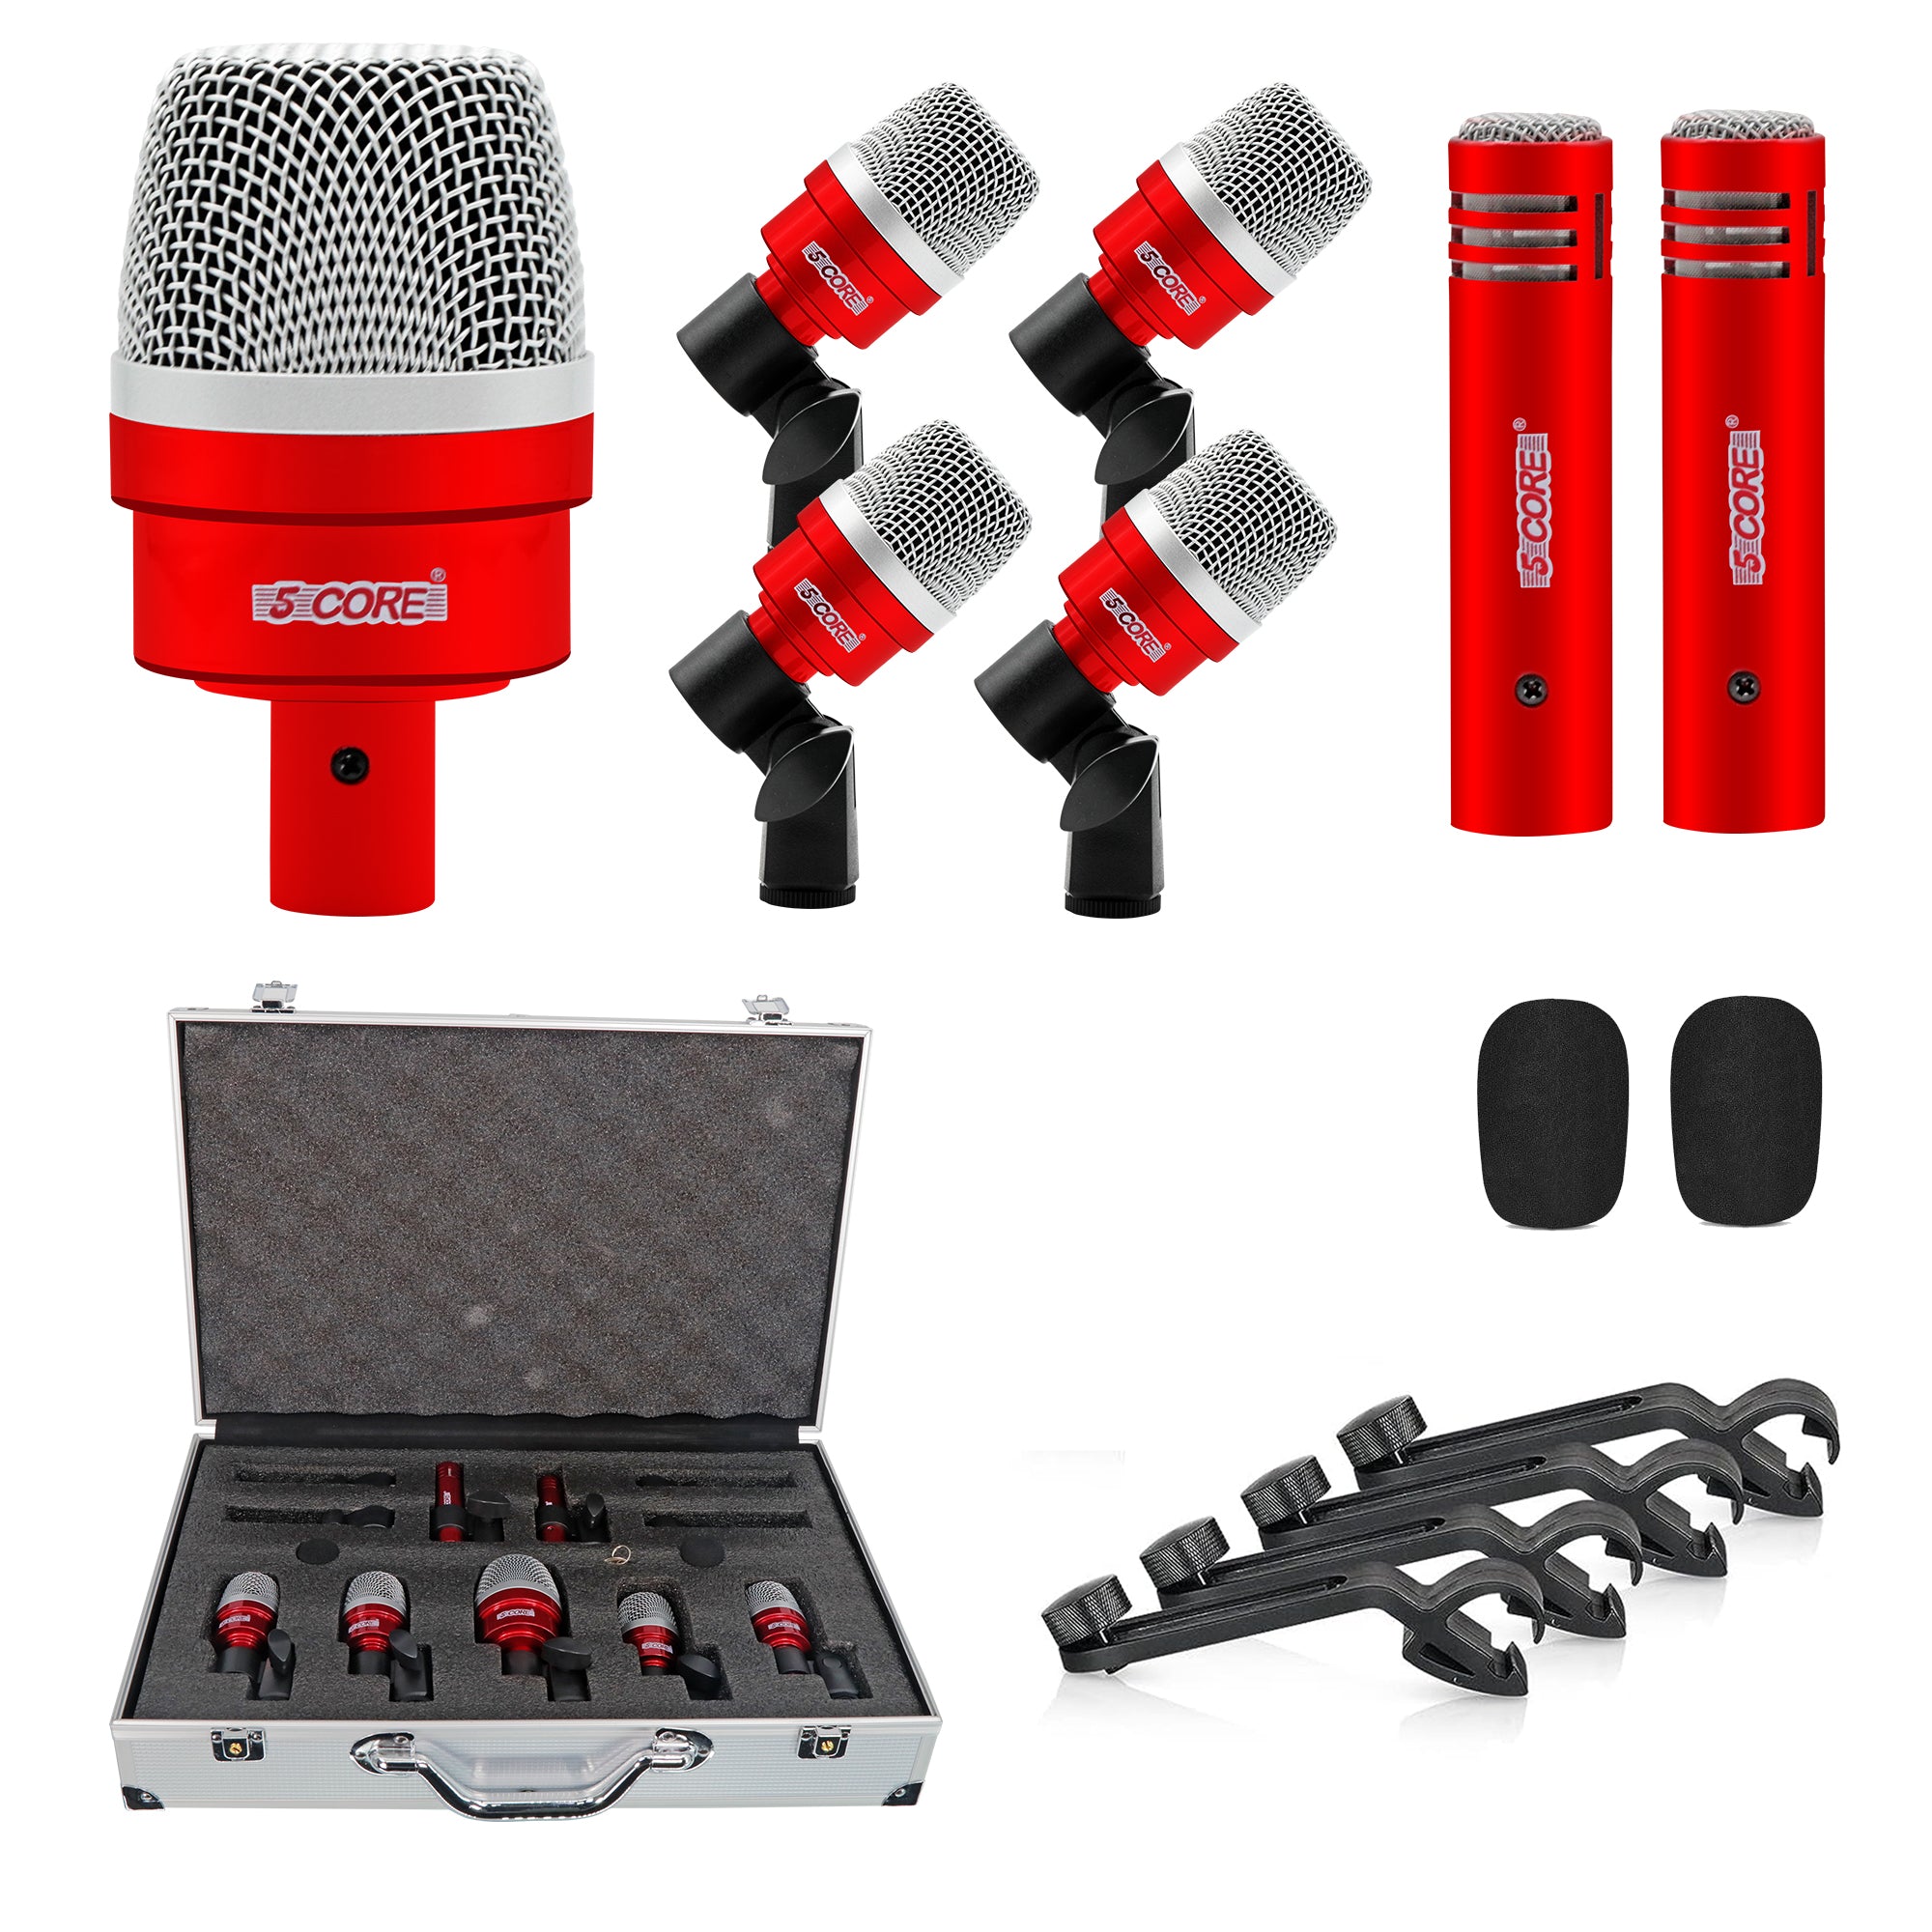 5 CORE 7 Piece Red Drum Microphone Kit Wired Dynamic XLR Mics Kick Bass Tom Snare and Cymbals Microphones Set for Drums